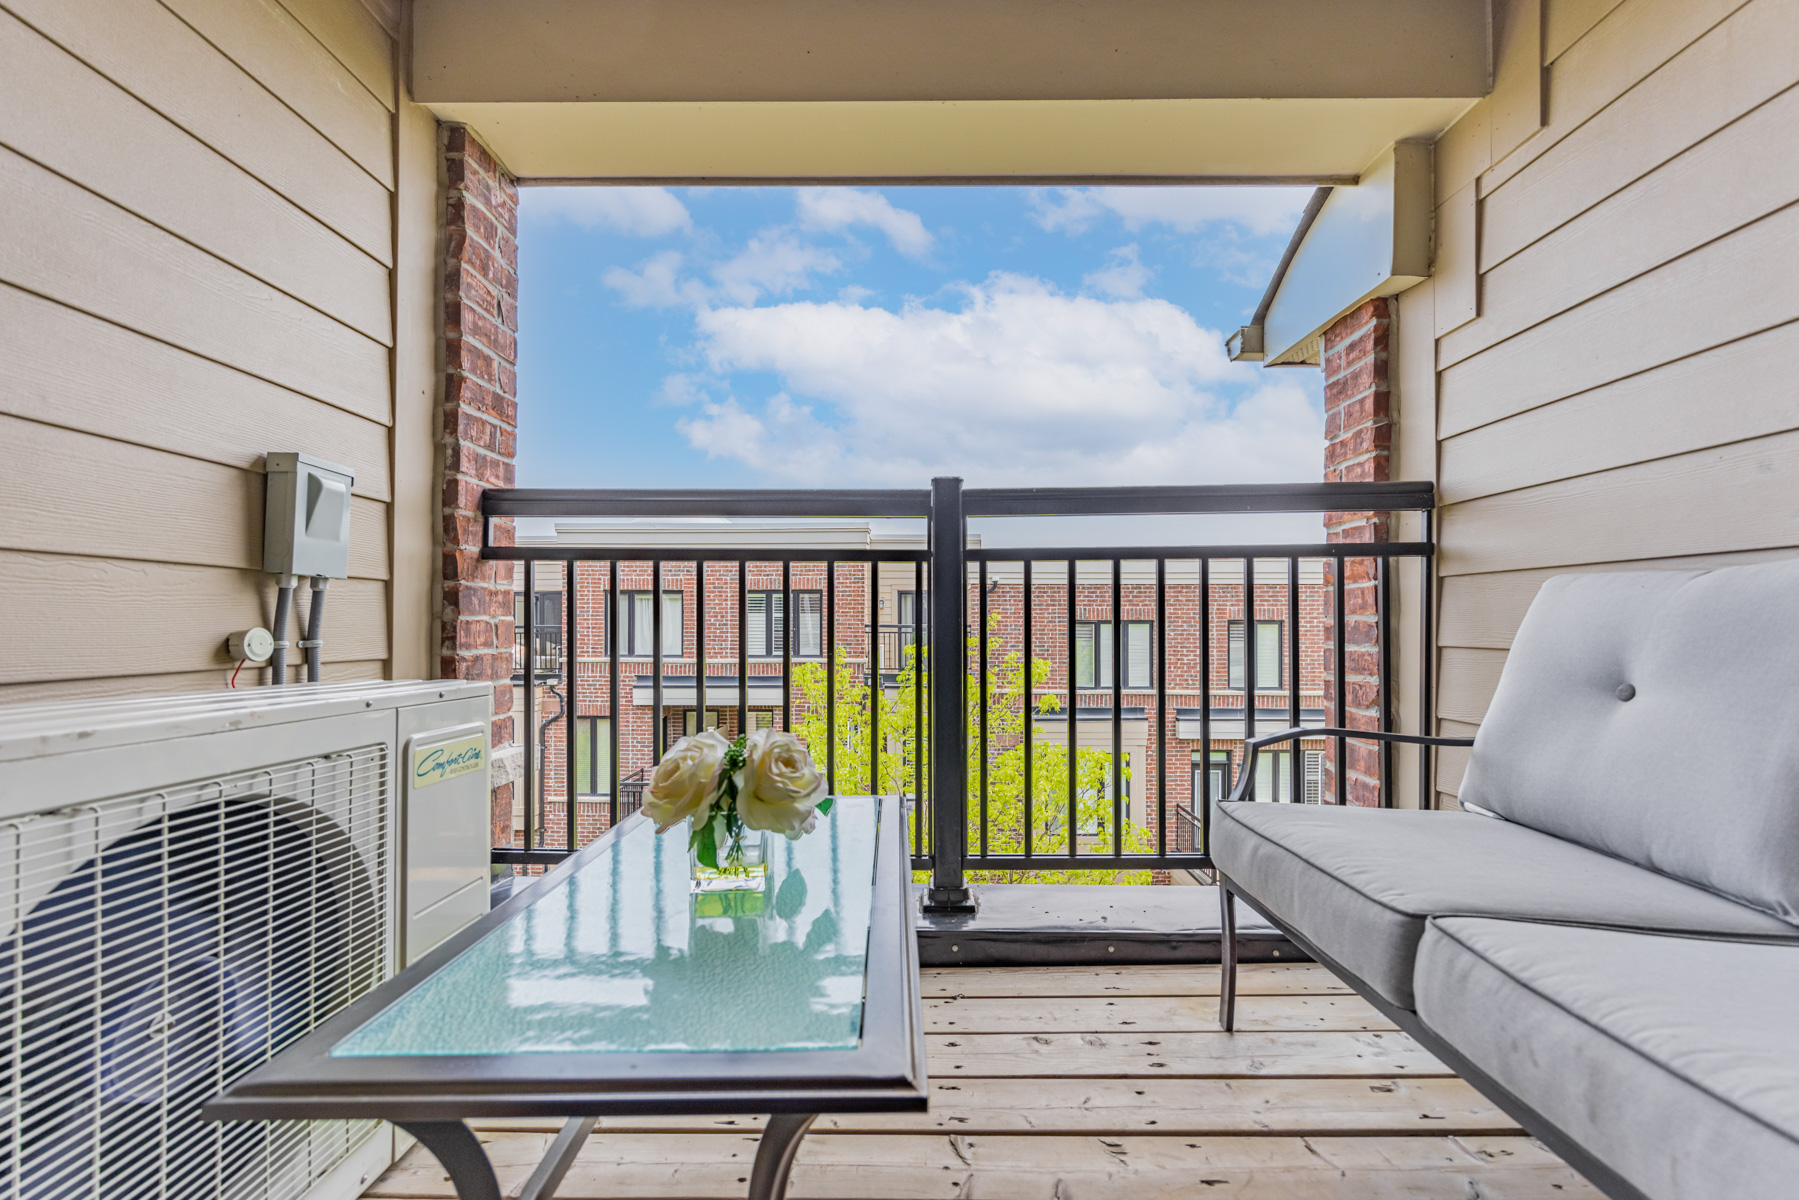 Spacious townhouse balcony with iron rails, wood floors and red-brick accents.